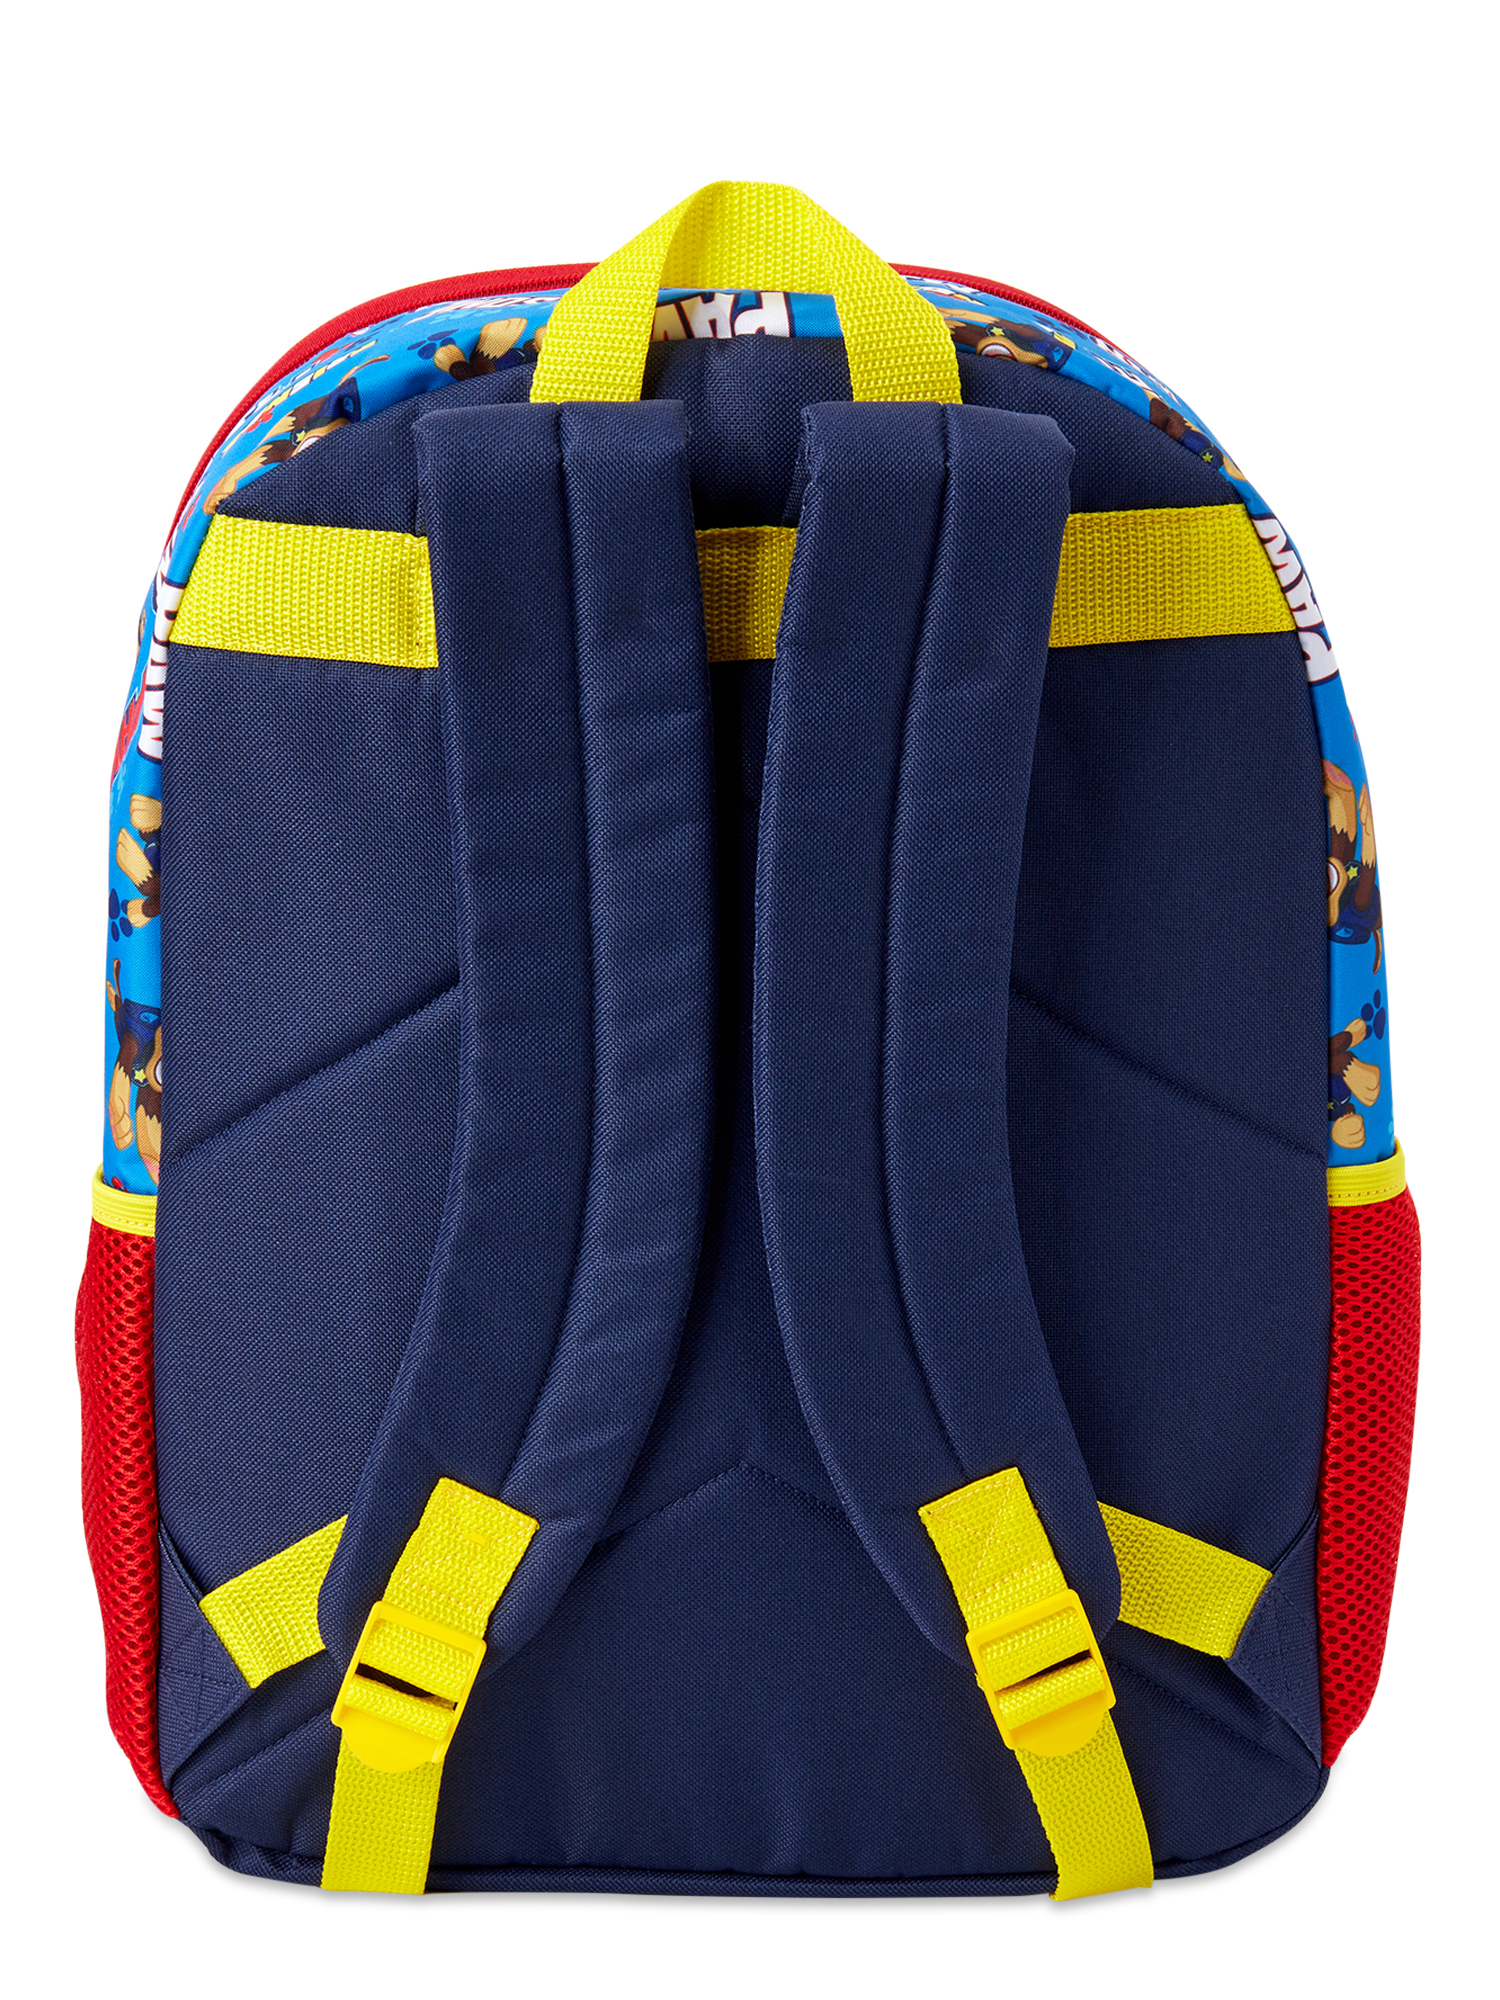 Paw Patrol Pawsome Backpack - image 3 of 6